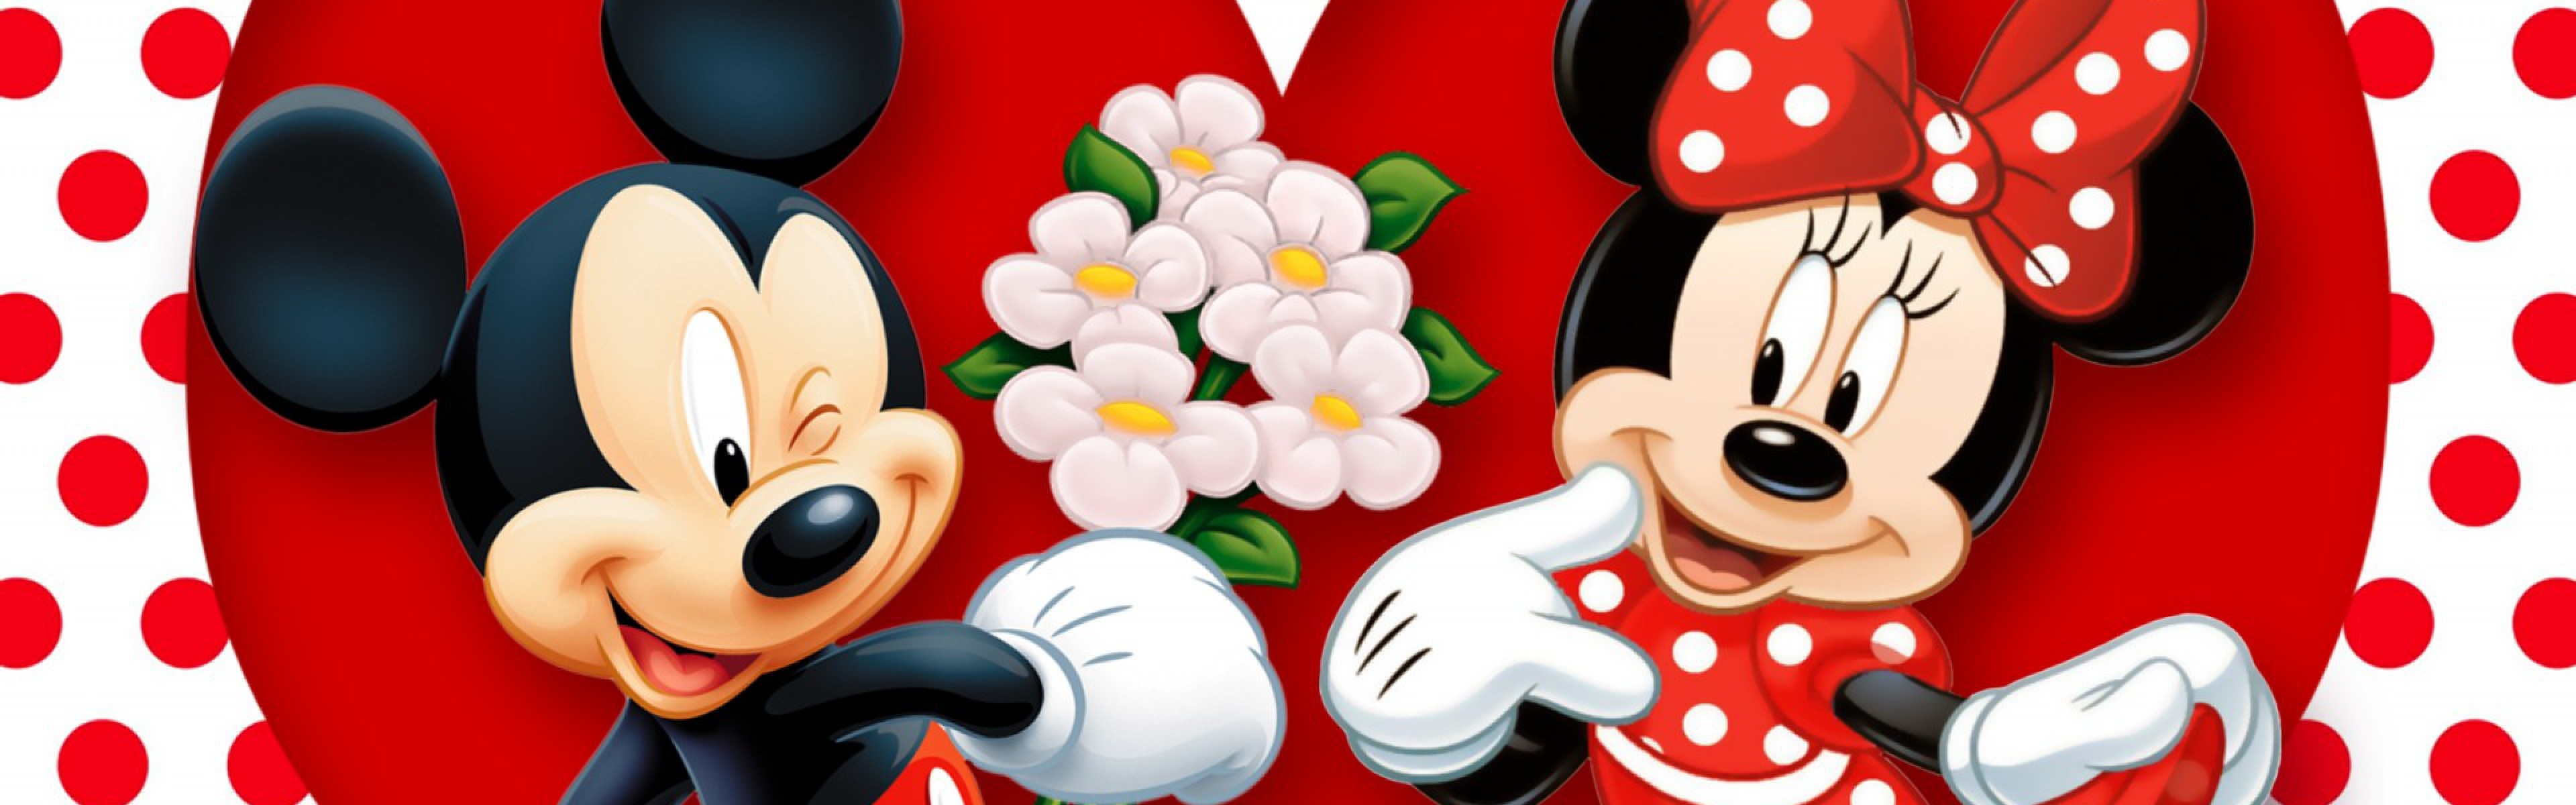 3840x1200  Wallpaper minnie mouse, mickey mouse, mouse